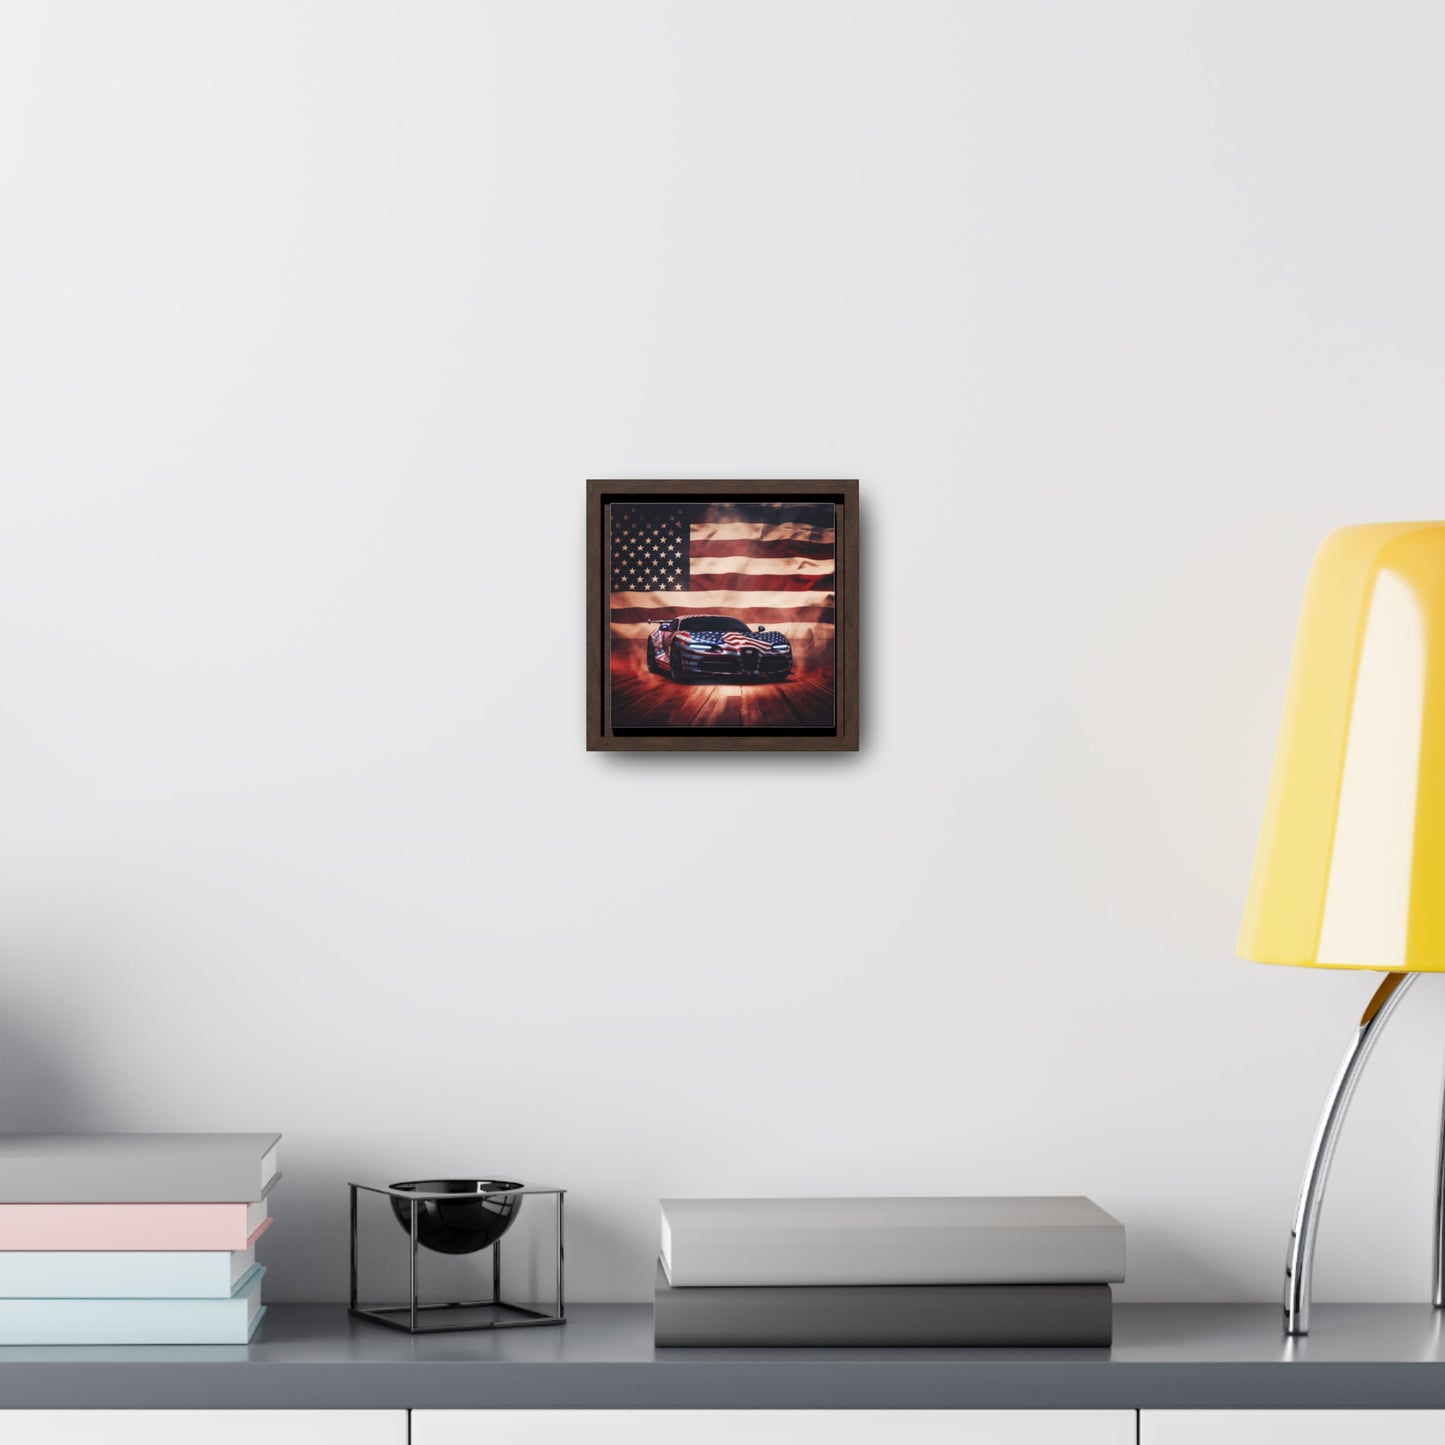 Gallery Canvas Wraps, Square Frame Abstract American Flag Background Bugatti 2